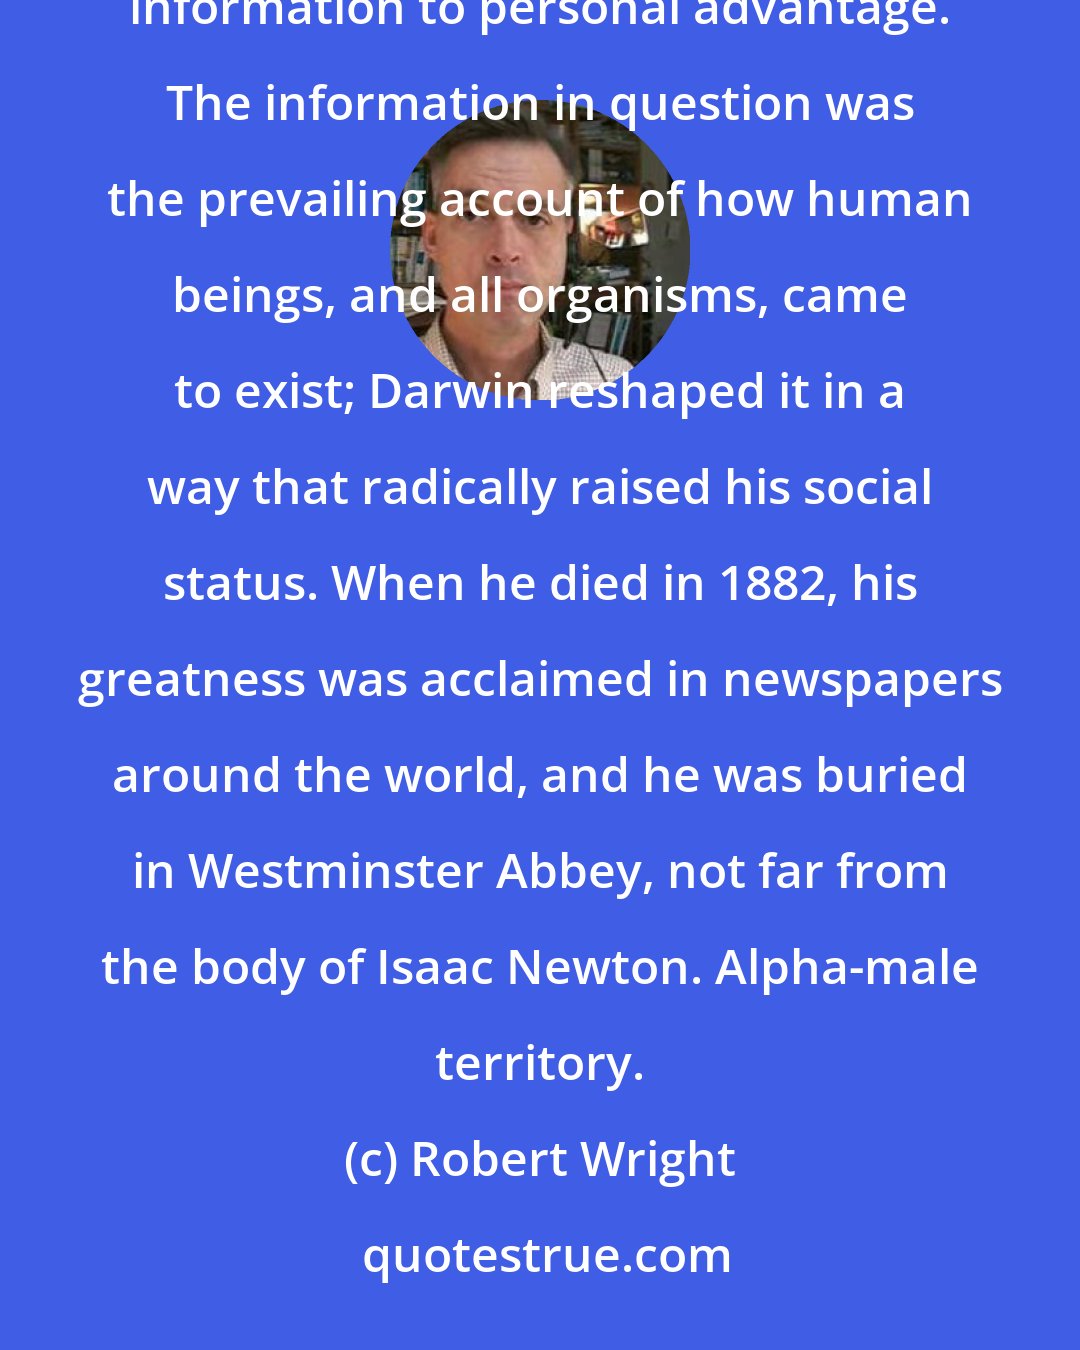 Robert Wright: Darwin was one of our finest specimens. He did superbly what human beings are designed to do: manipulate social information to personal advantage. The information in question was the prevailing account of how human beings, and all organisms, came to exist; Darwin reshaped it in a way that radically raised his social status. When he died in 1882, his greatness was acclaimed in newspapers around the world, and he was buried in Westminster Abbey, not far from the body of Isaac Newton. Alpha-male territory.